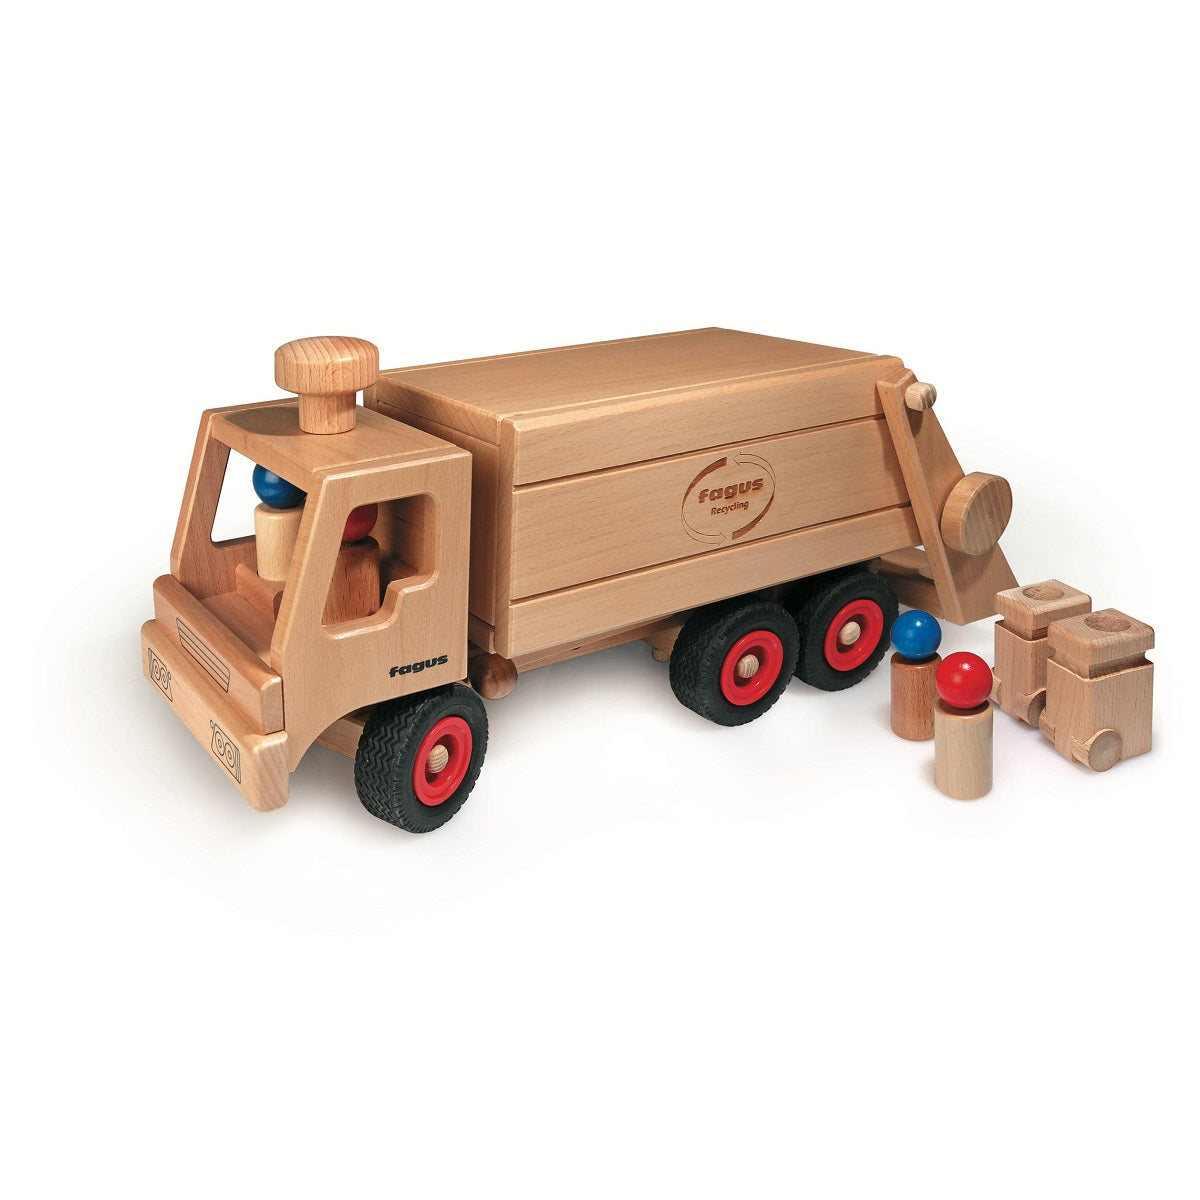 Fagus Recycling / Garbage Truck